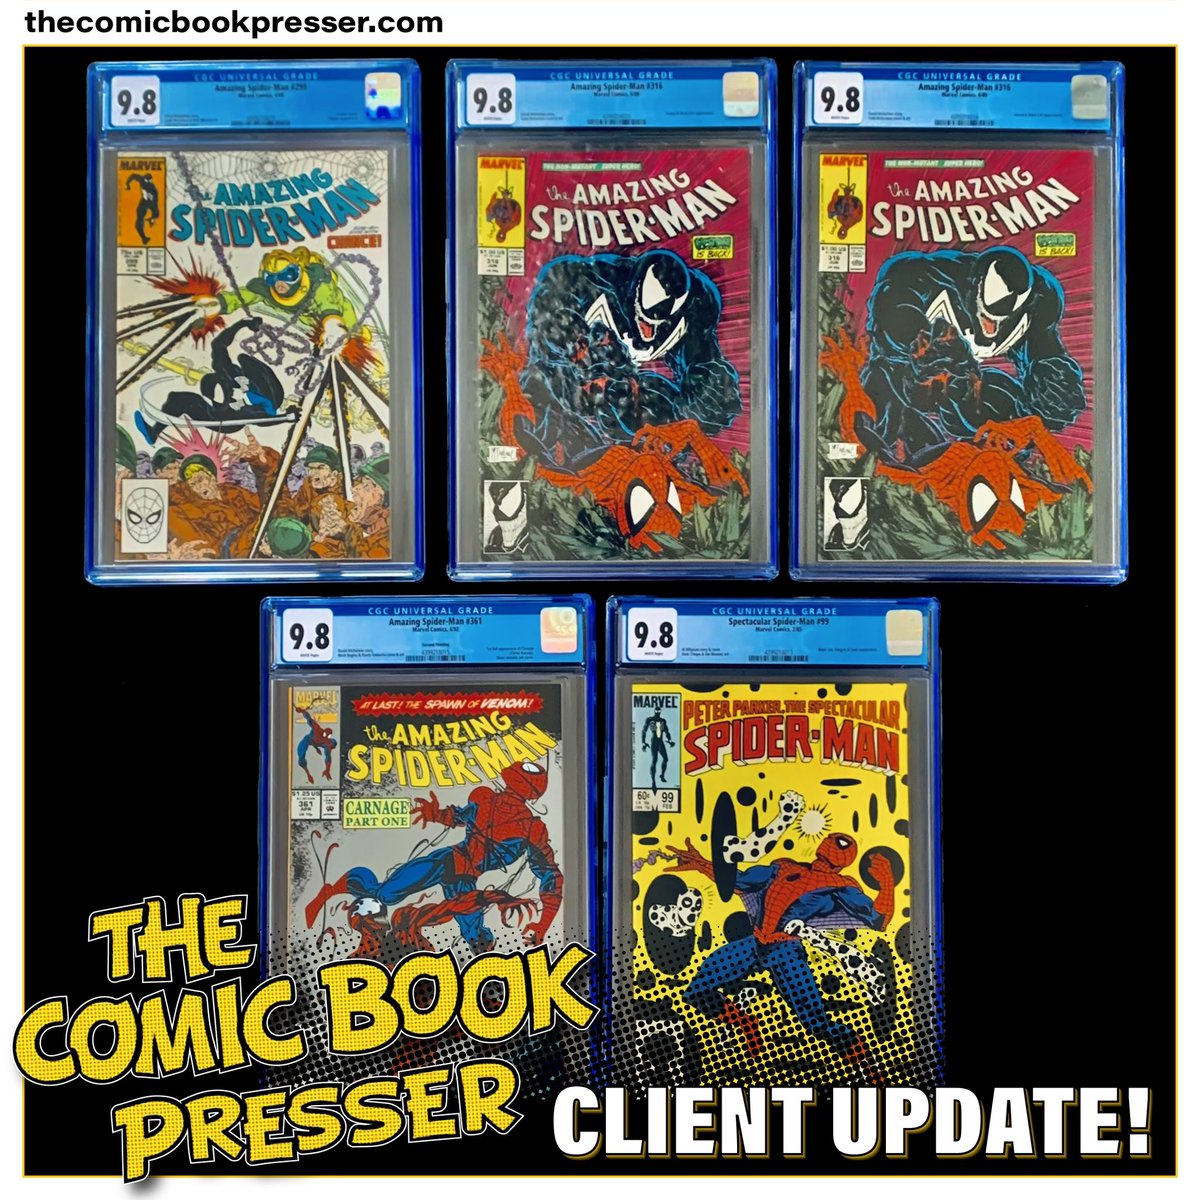 Some great Modern ASM keys we recently worked on and shipped directly to CGC. We press Modern books on a daily basis.

#thecomicbookpresser #comicpressing #comicbookpressing #comicpressingresults #comicbooks #venom #amazingspiderman #marvelcomics